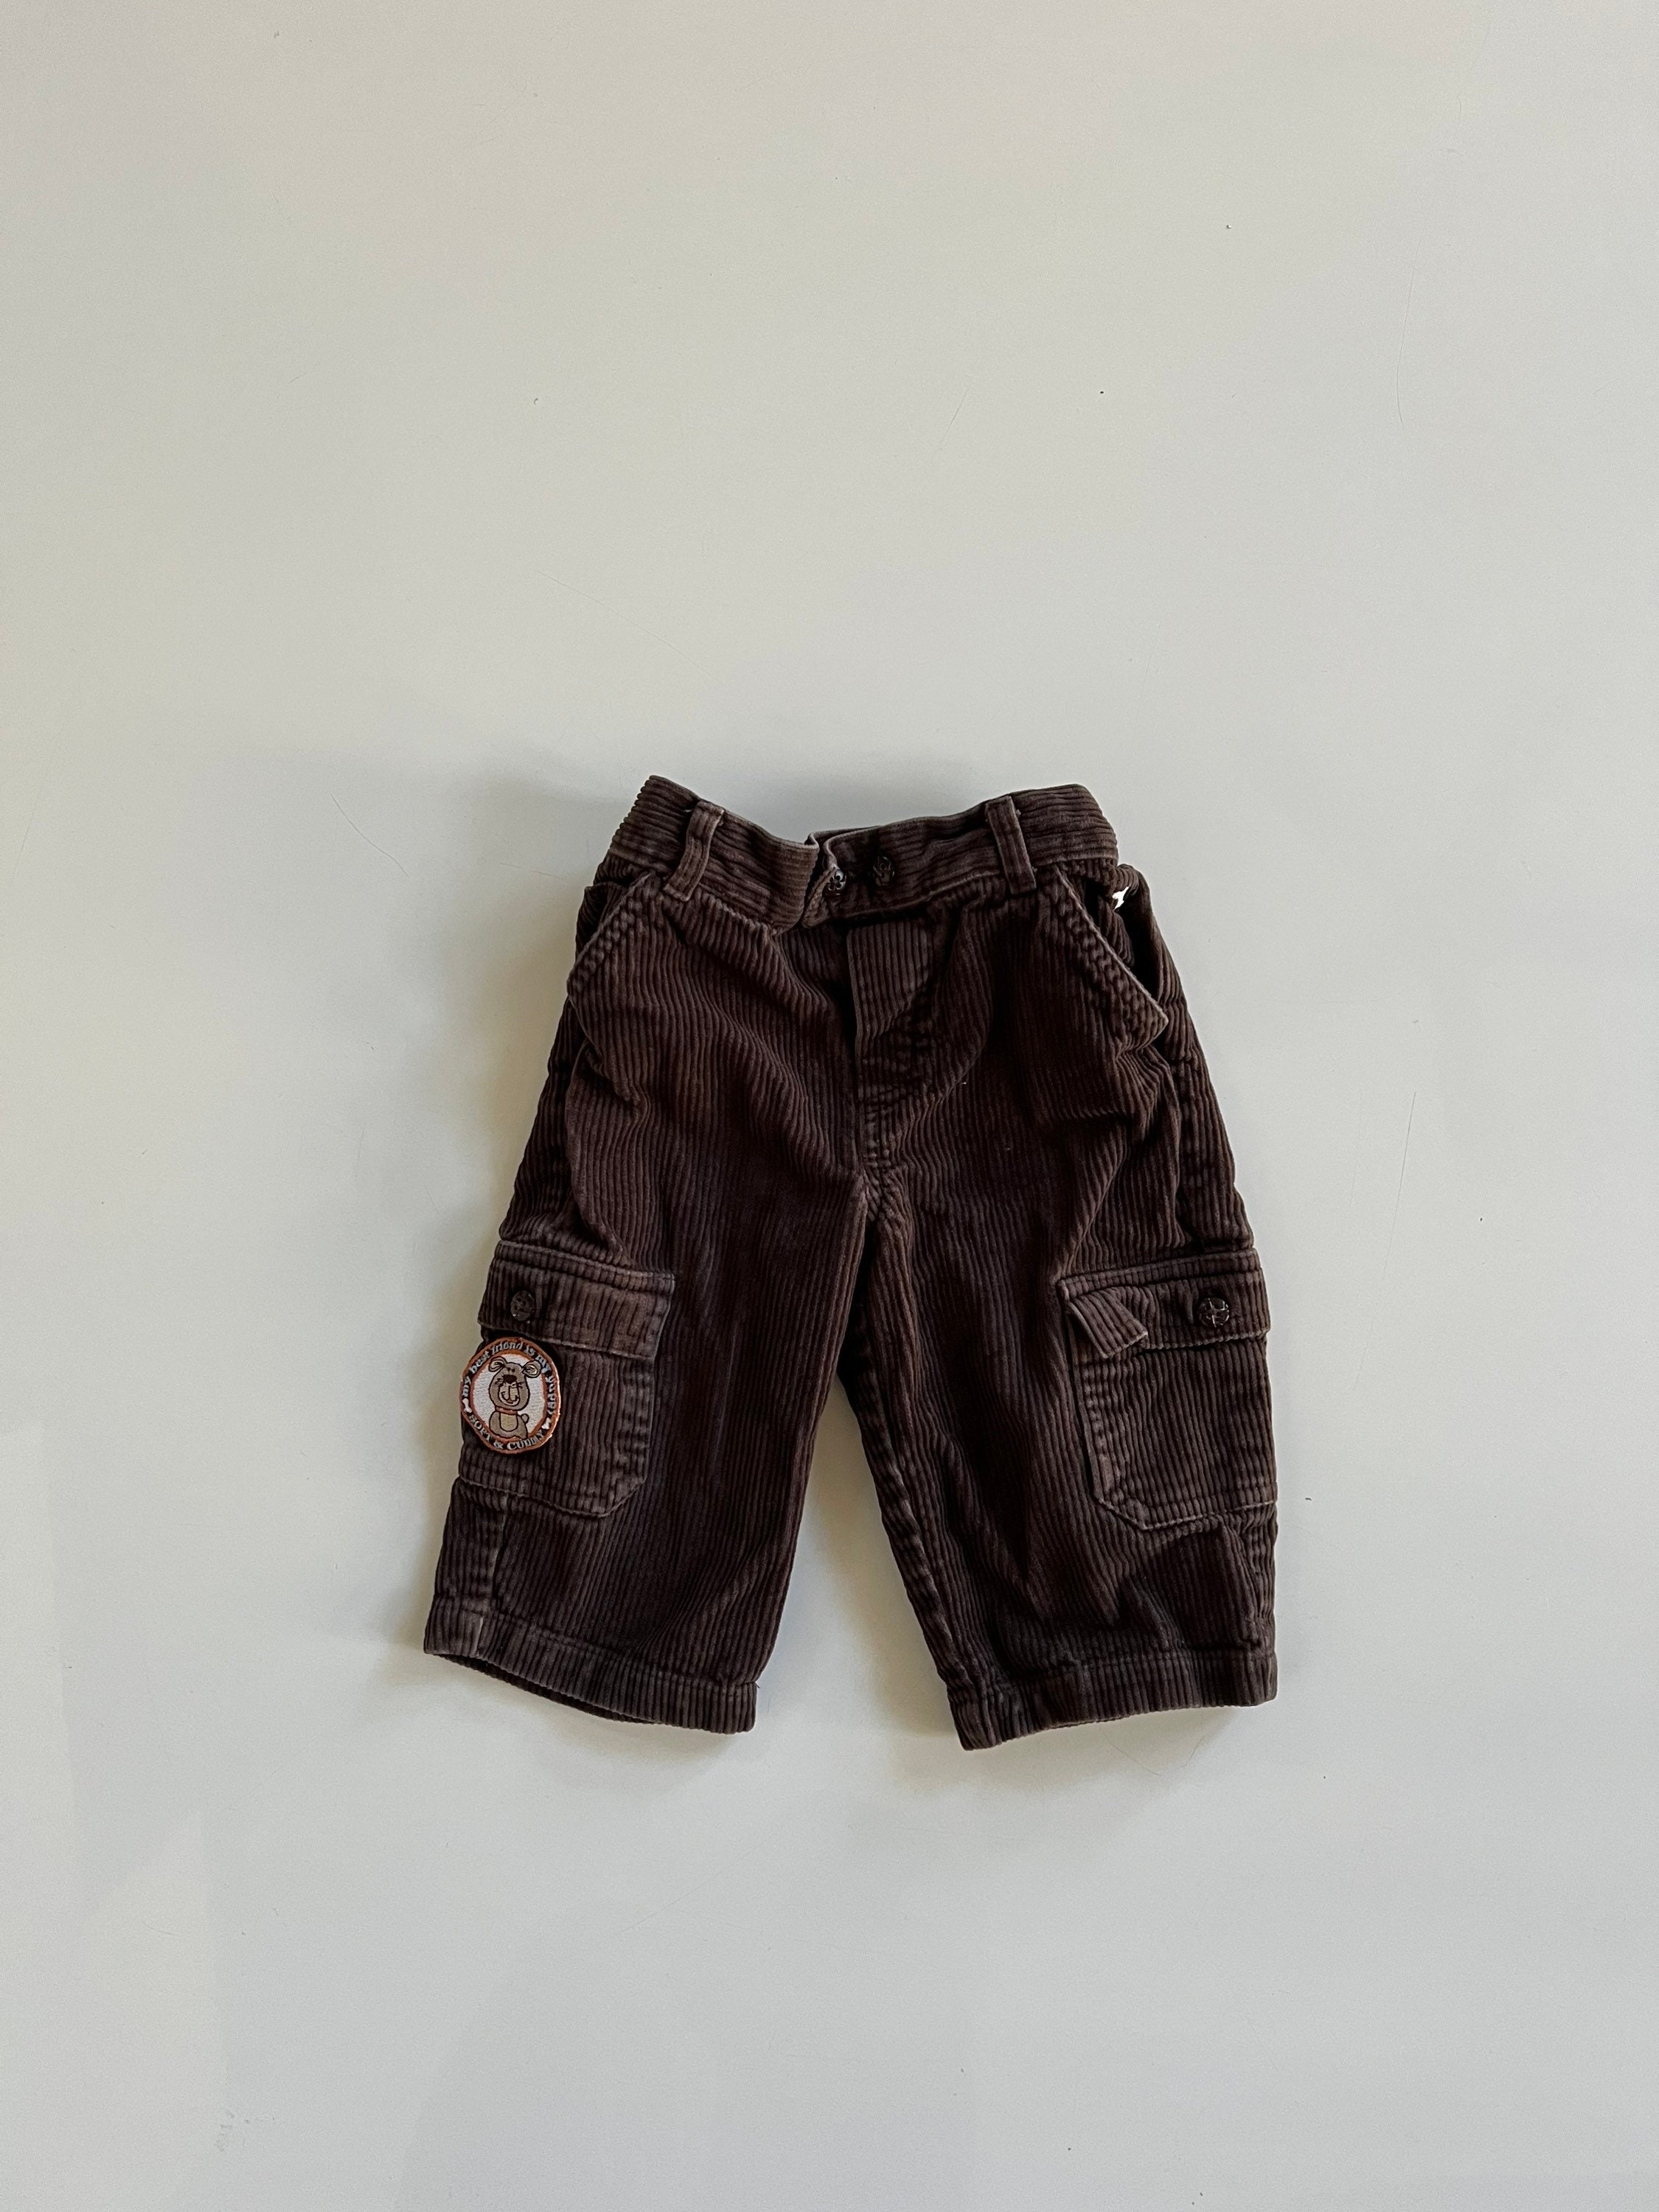 Slip On Corduroy Trousers for Boys - brown medium solid with design, Boys